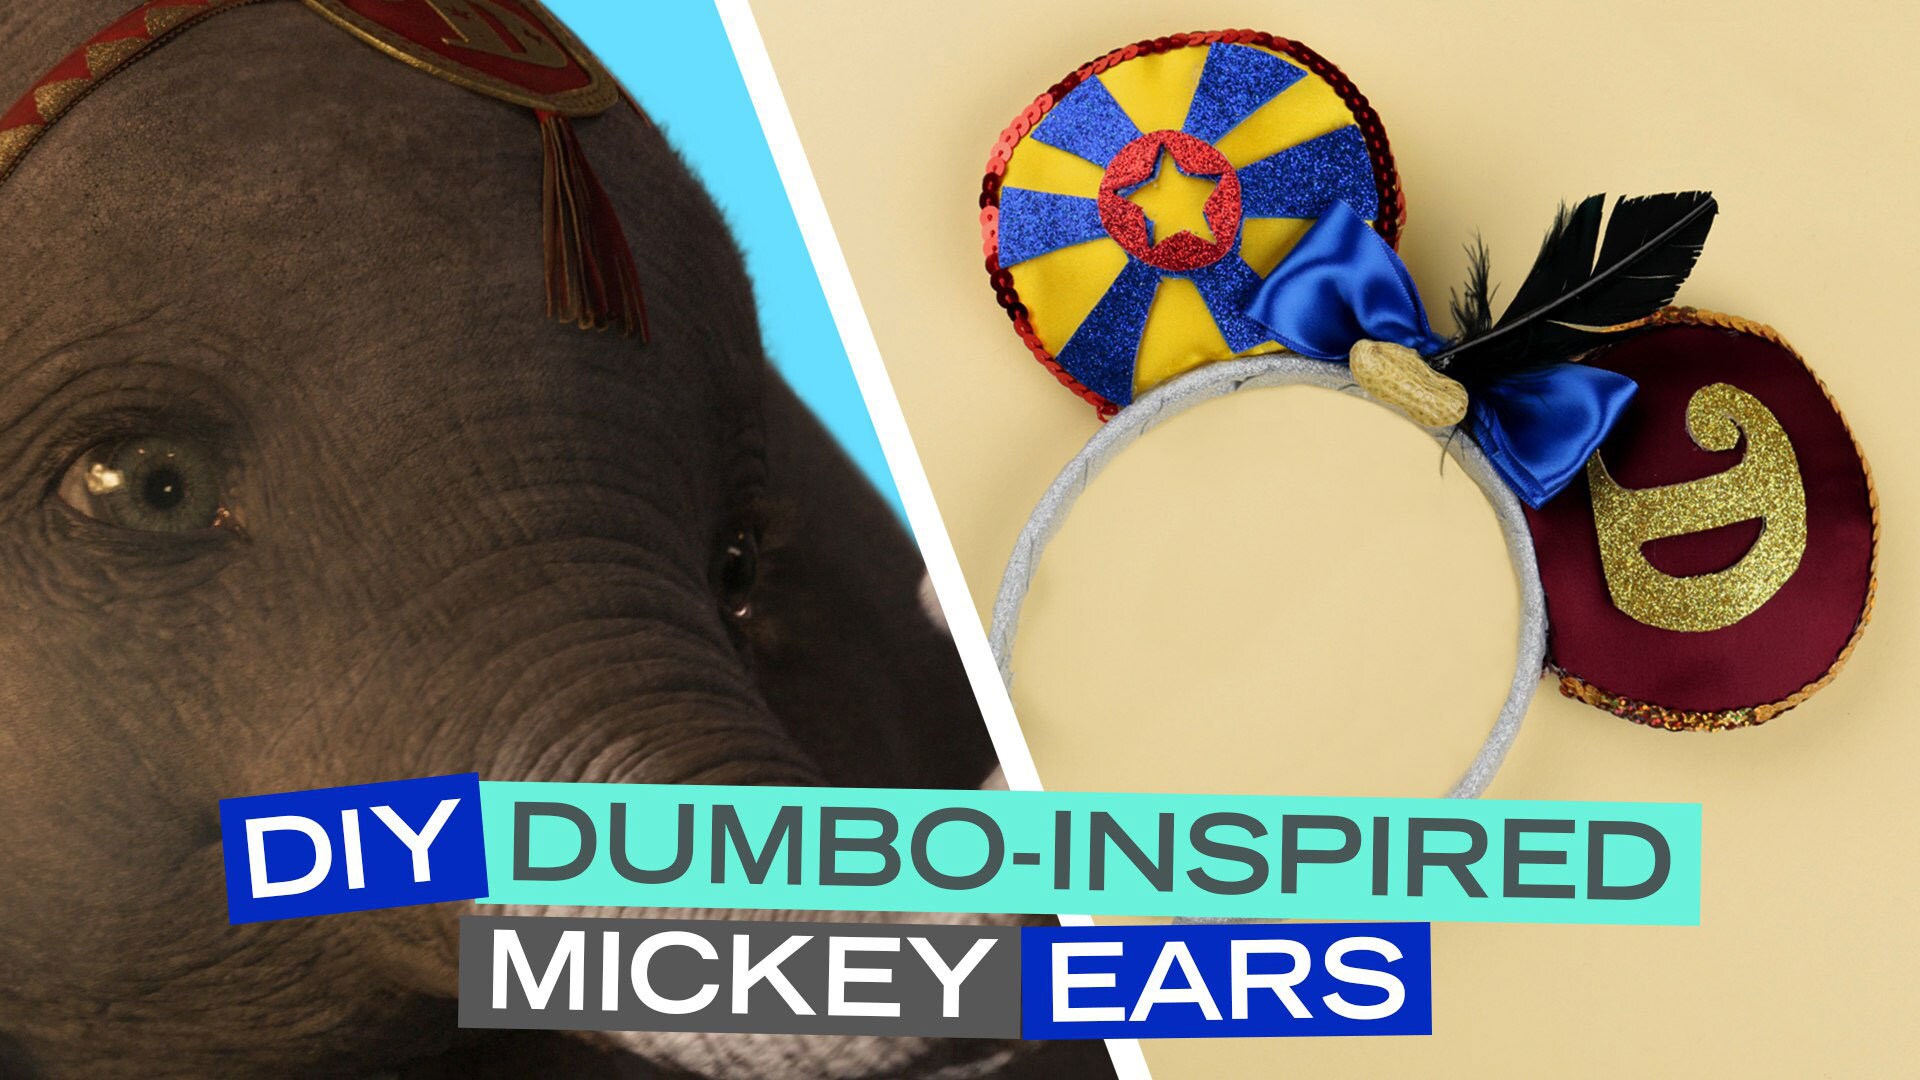 Take Flight With These Show-Stopping DIY Mickey Ears Inspired By Dumbo